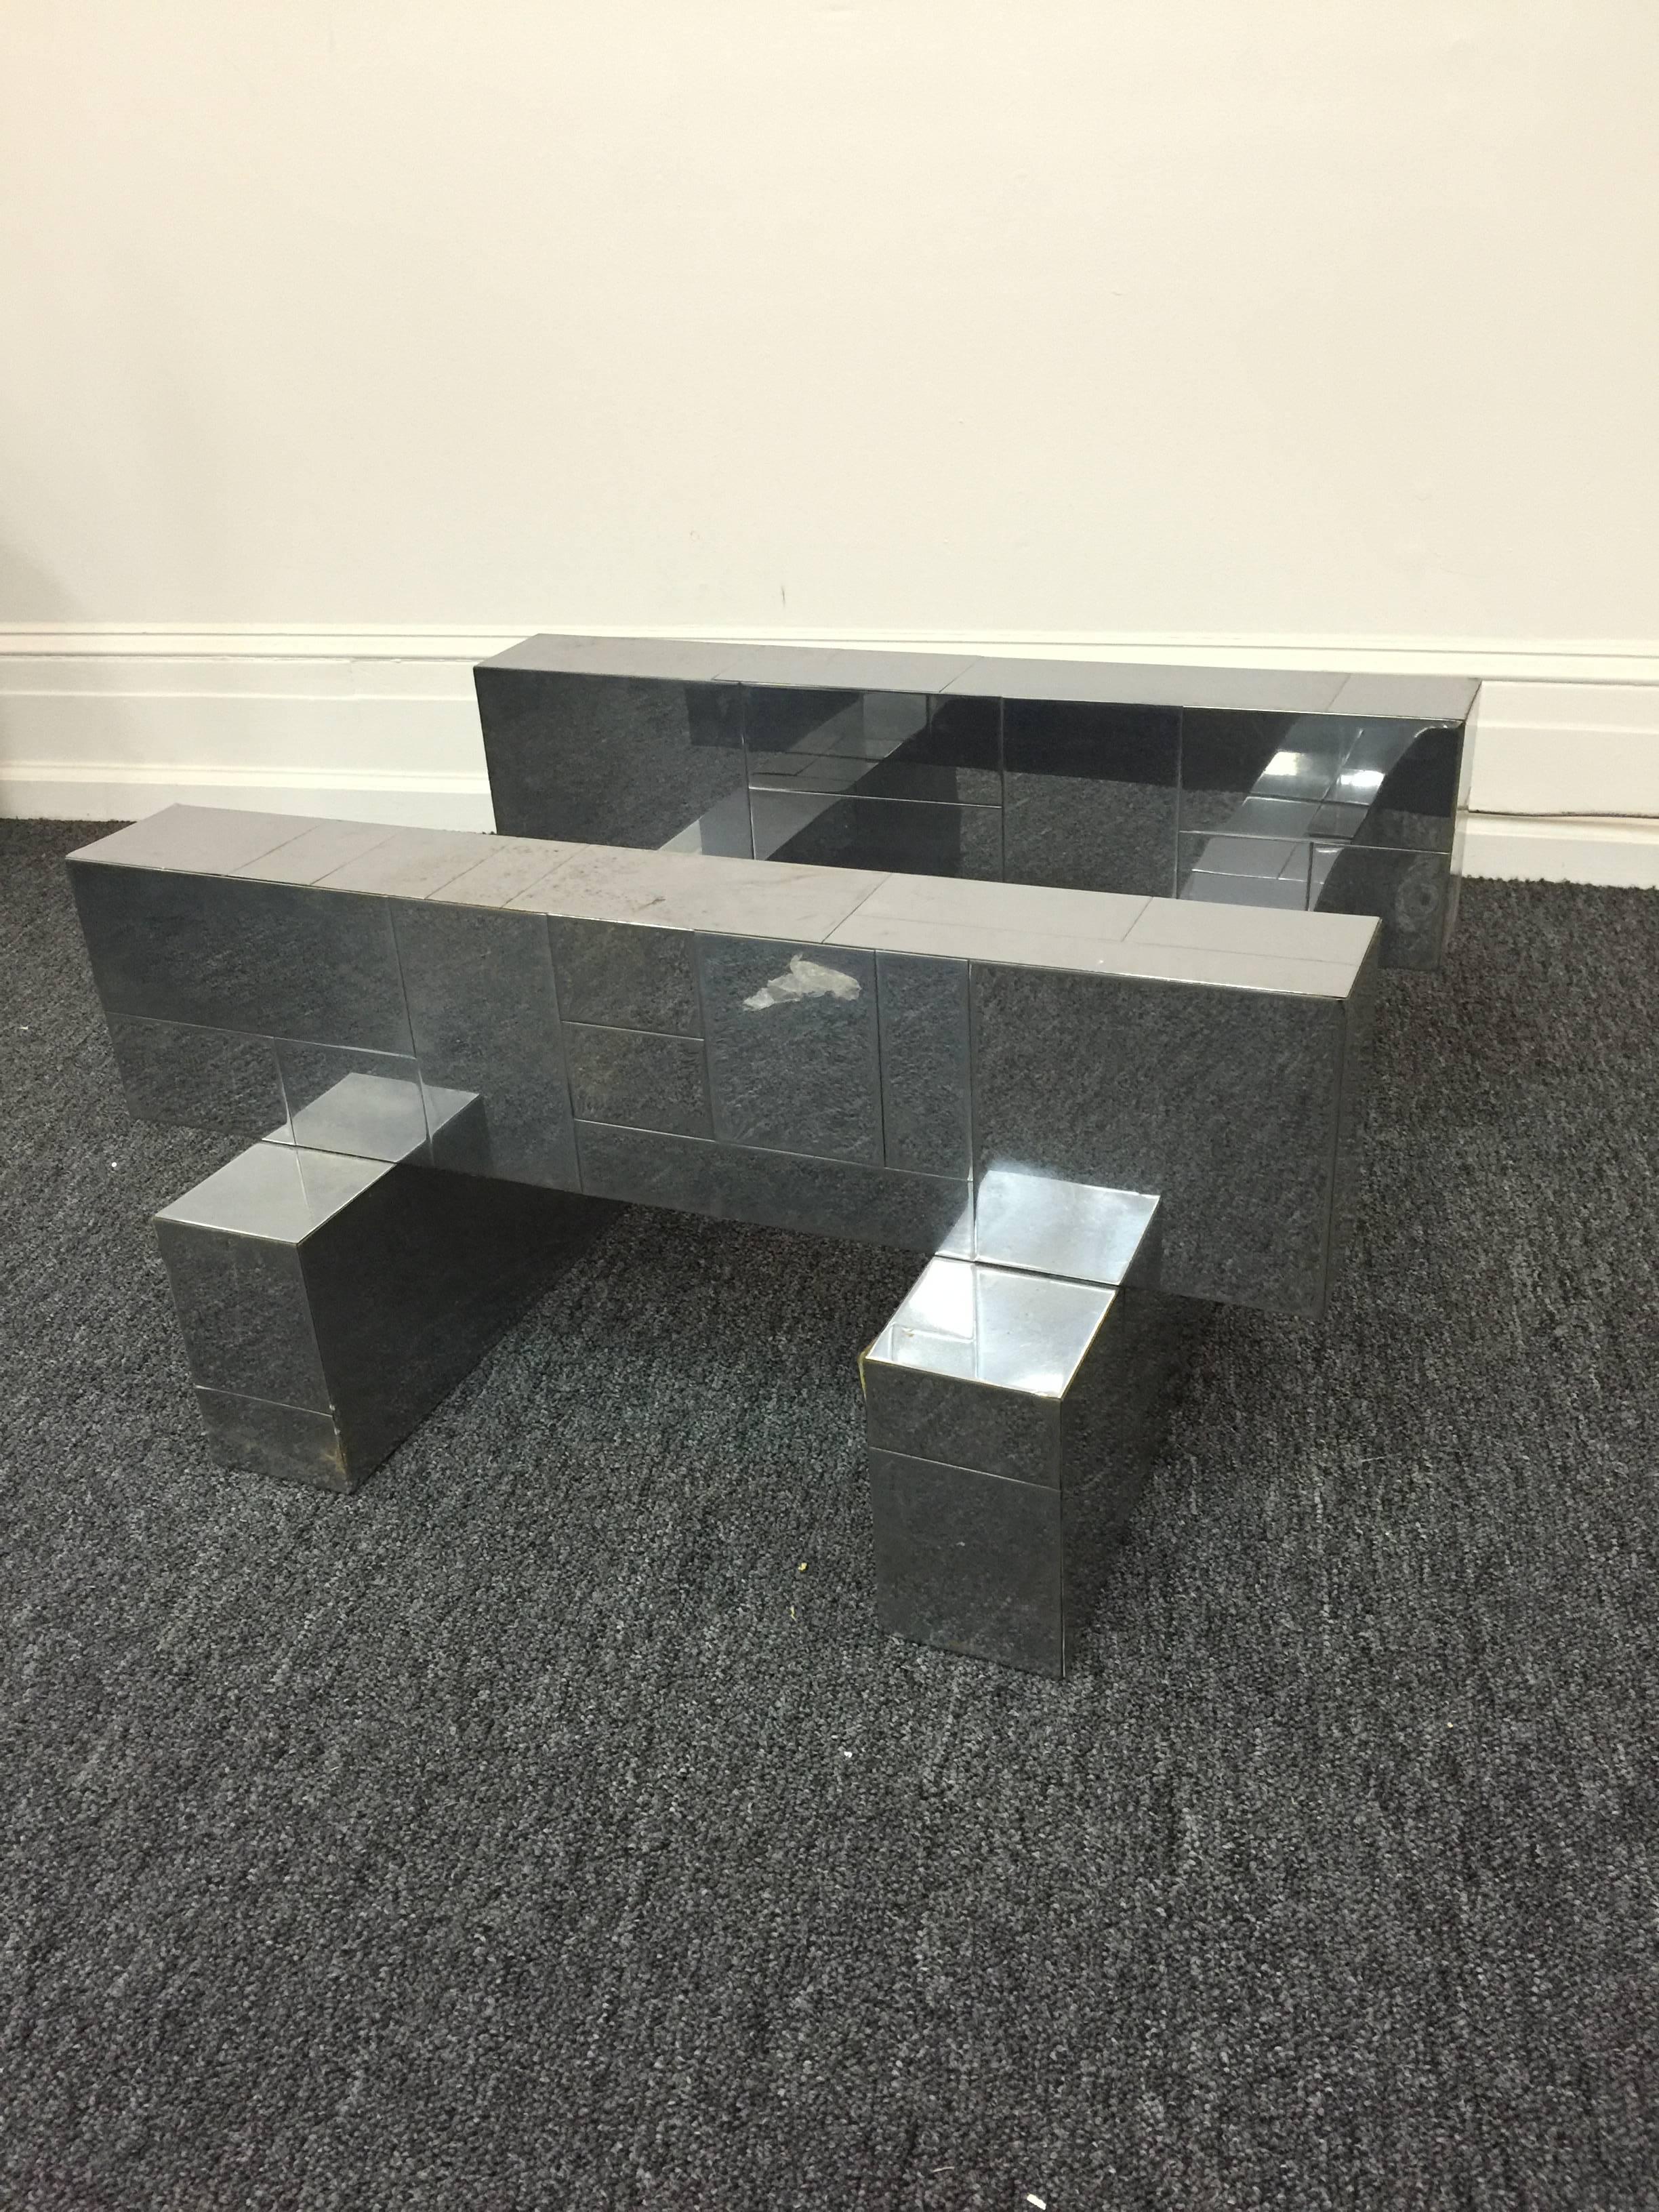 North American Paul Evans Cityscape Coffee Table with Glass Top, circa 1970s For Sale